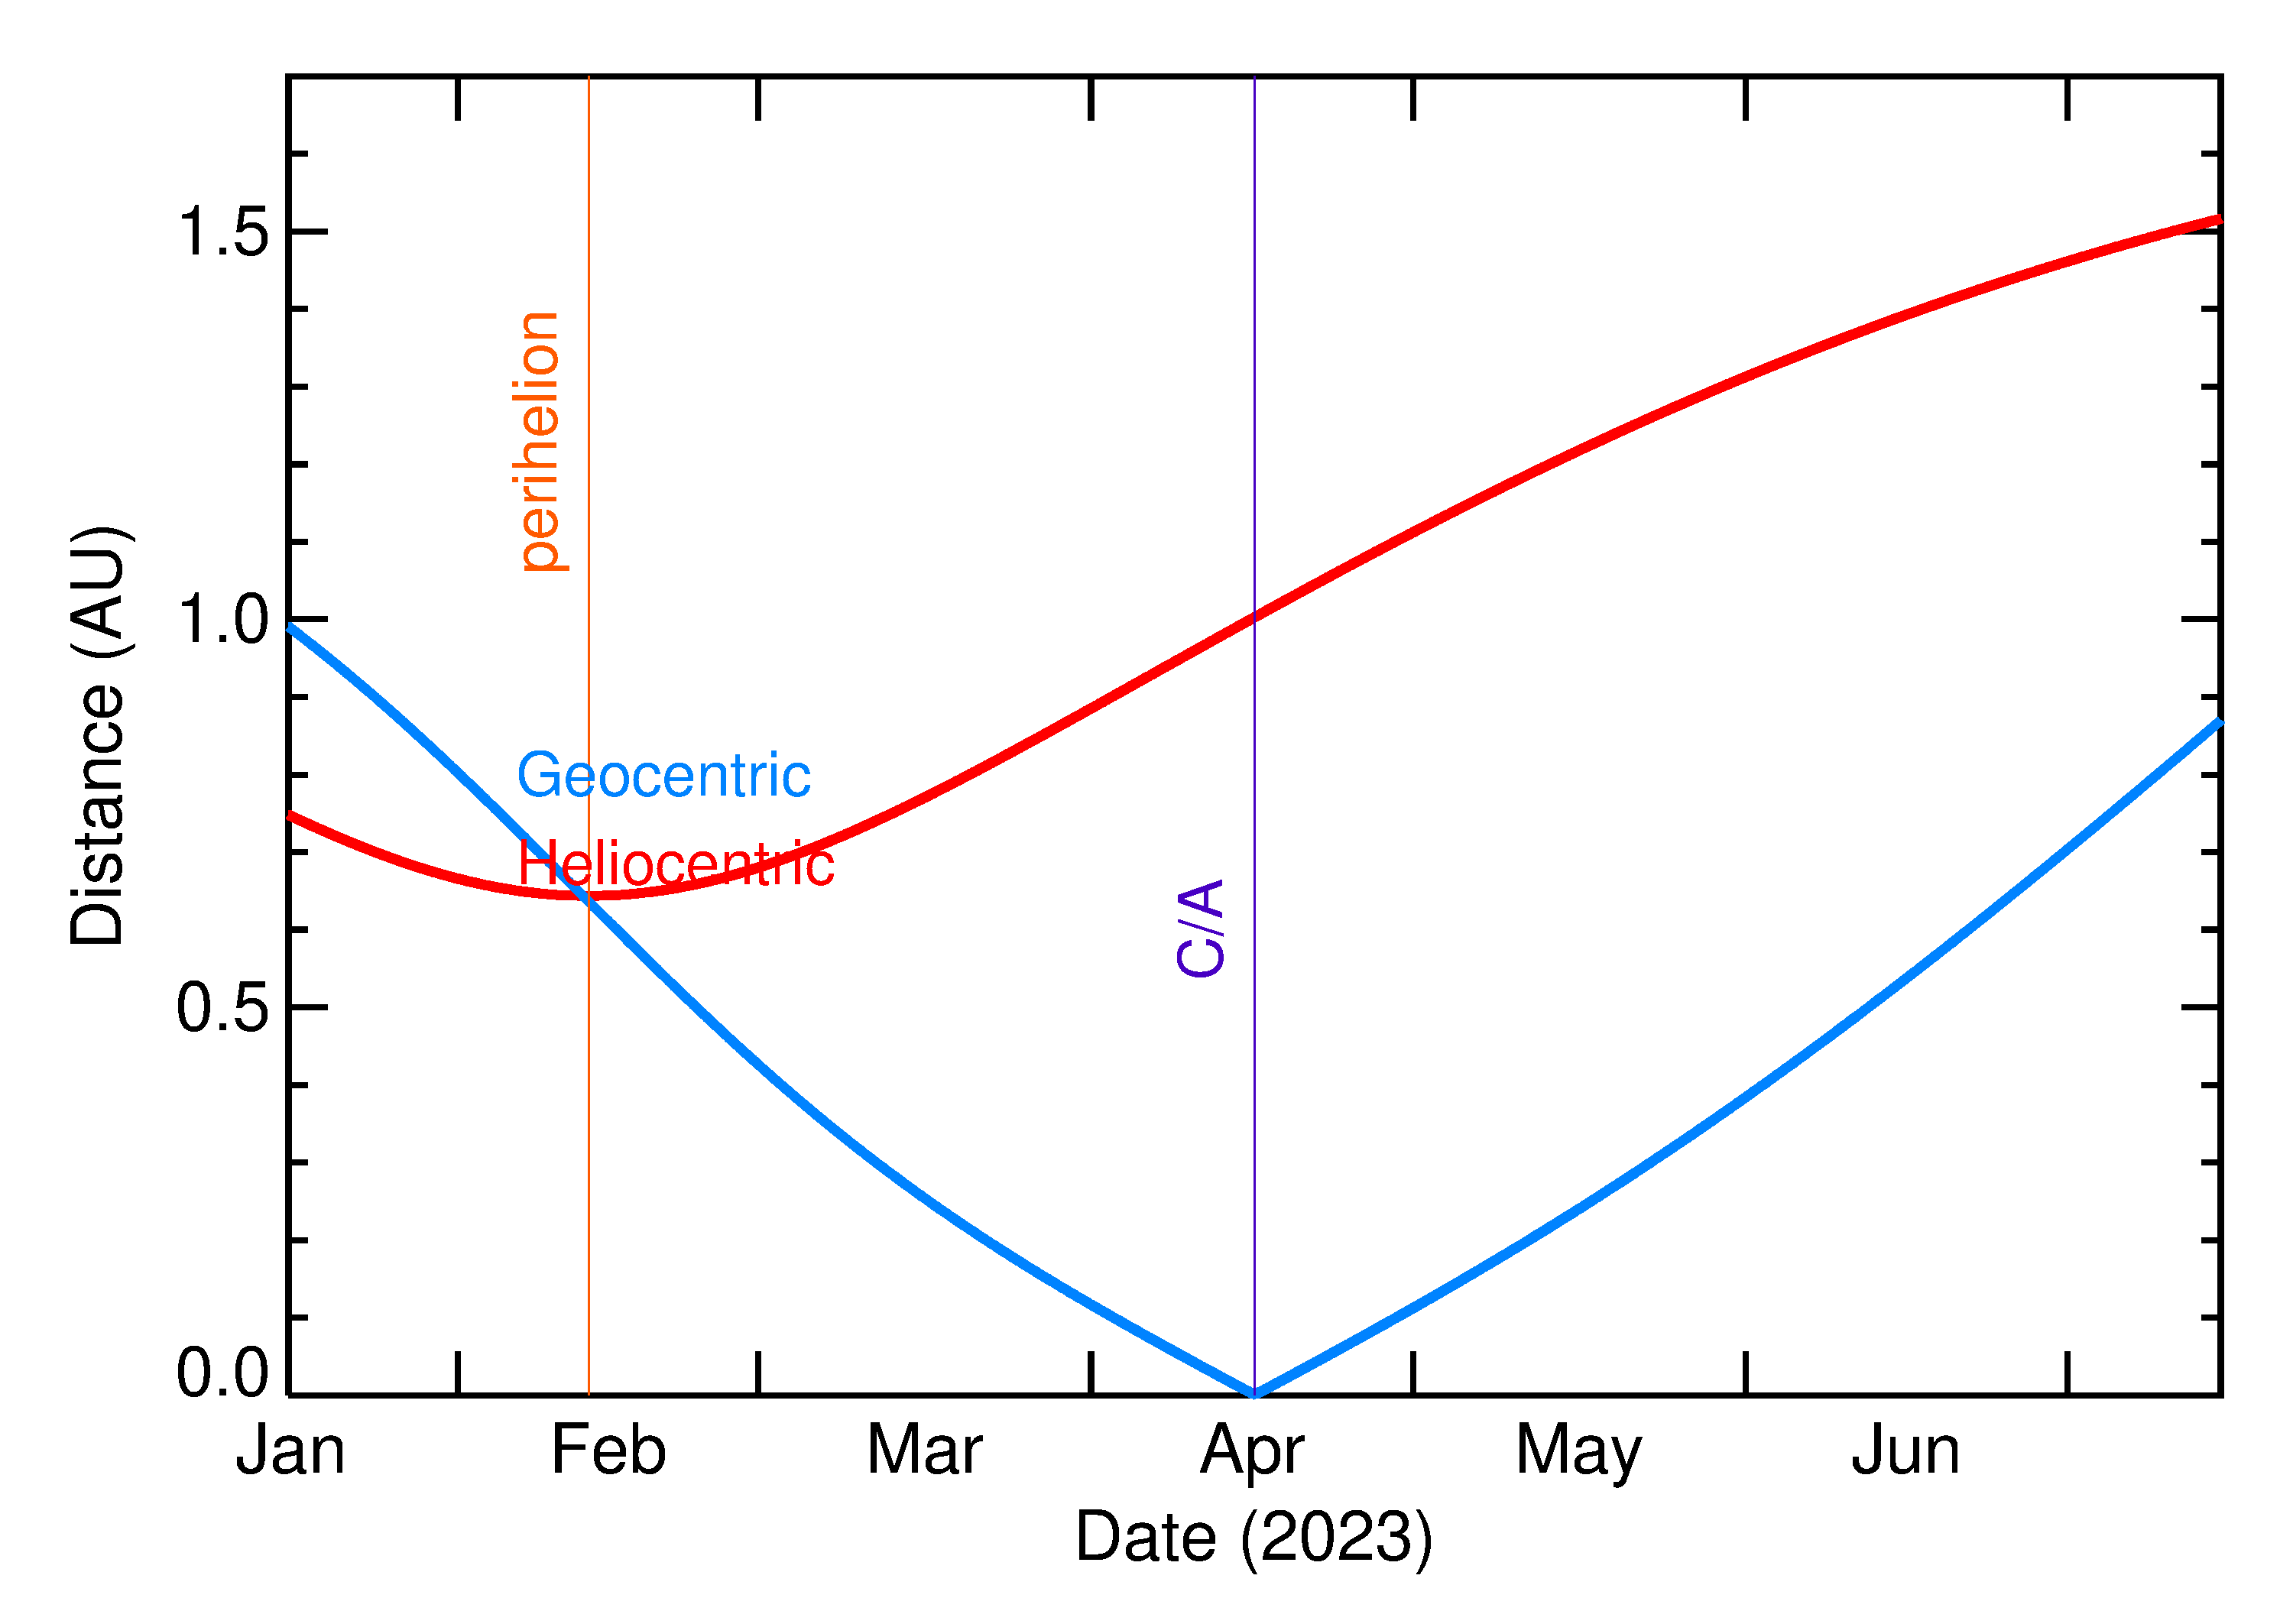 Heliocentric and Geocentric Distances of 2023 HZ in the months around closest approach